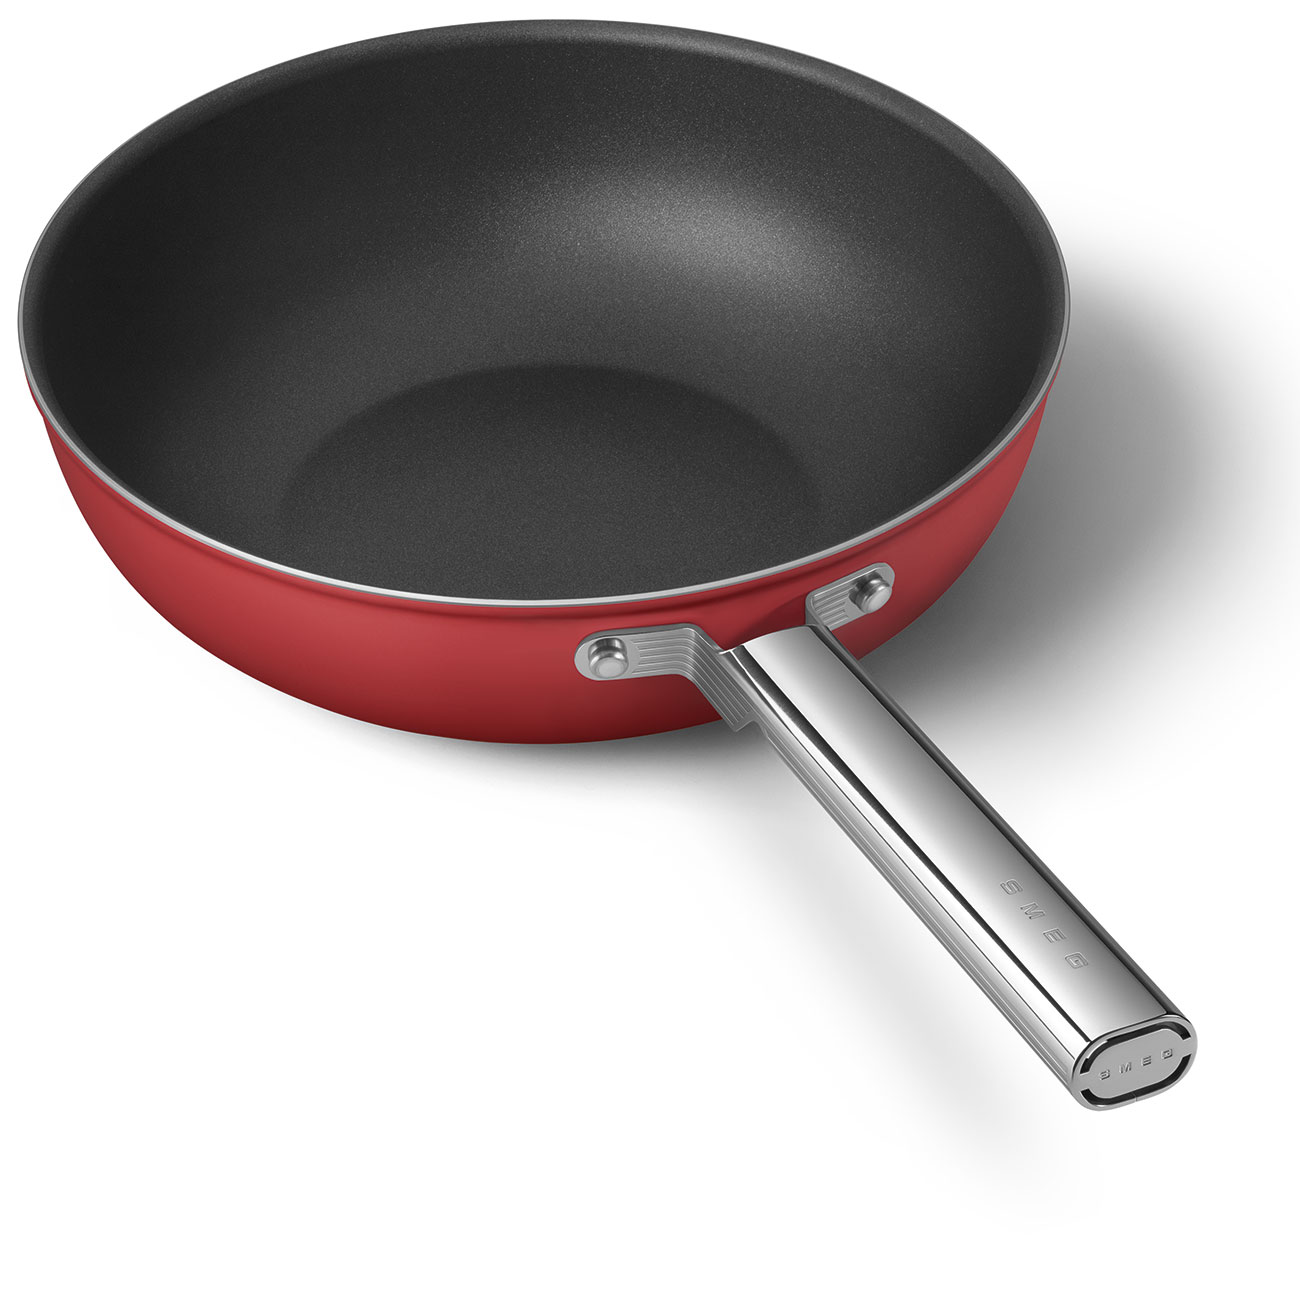 Smeg Red Non-stick Wok with Stainless Steel Handle - CKFW3001RDM_8